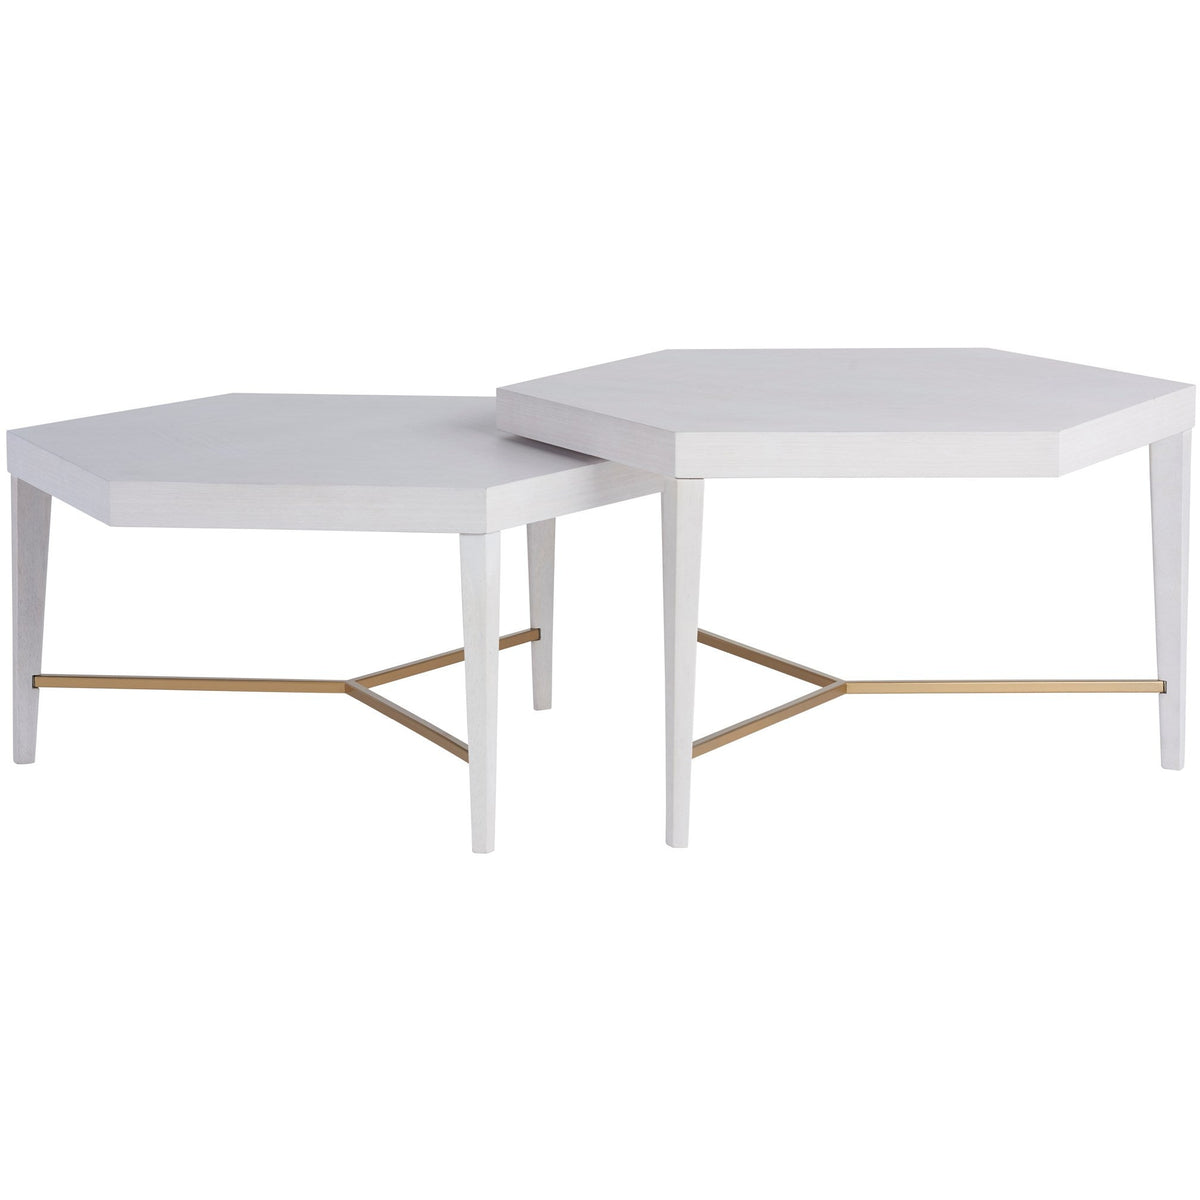 Sydney Bunching Cocktail Tables - Be Bold Furniture